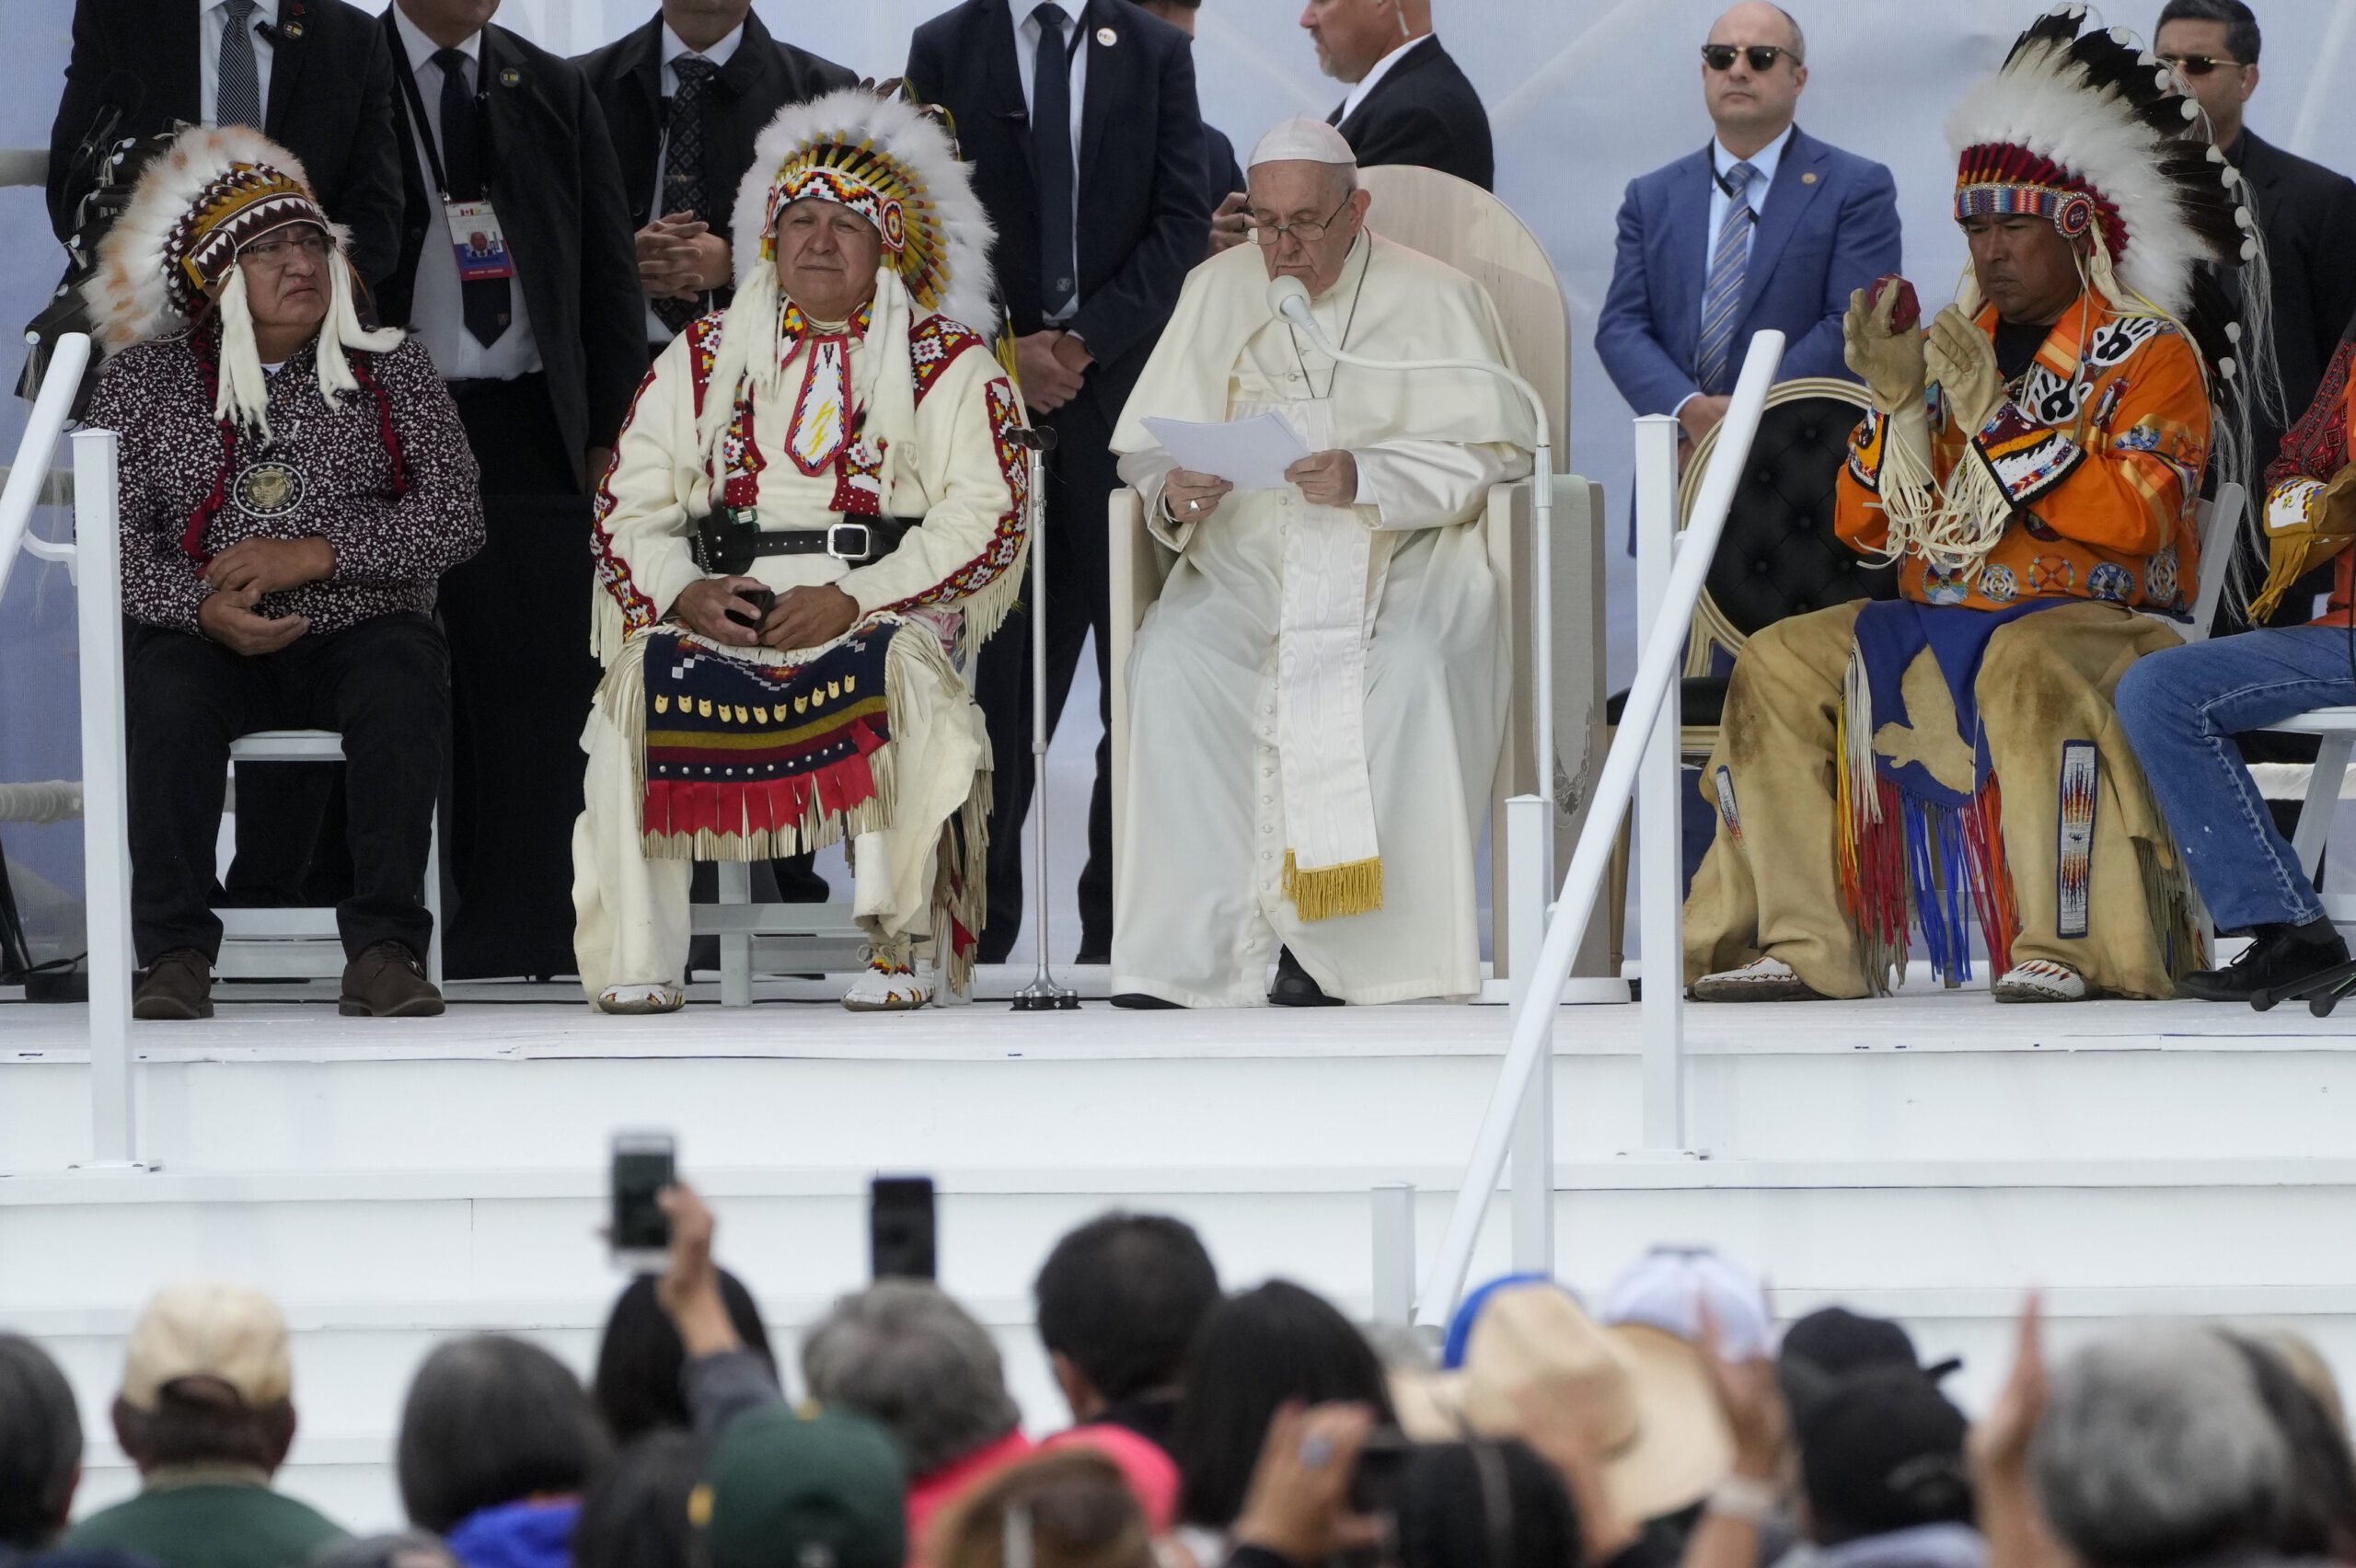 Pope Francis delivers his speech as he meets the Indigenous communities, including First Nations, Metis and Inuit, at Our Lady of Seven Sorrows Catholic Church in Maskwacis, near Edmonton, Canada, July 25, 2022. Francis is on a “penitential” visit to Canada to beg forgiveness from survivors of the country’s residential schools, where Catholic missionaries contributed to the “cultural genocide” of generations of Indigenous children by trying to stamp out their languages, cultures and traditions. (AP Photo/Gregorio Borgia)